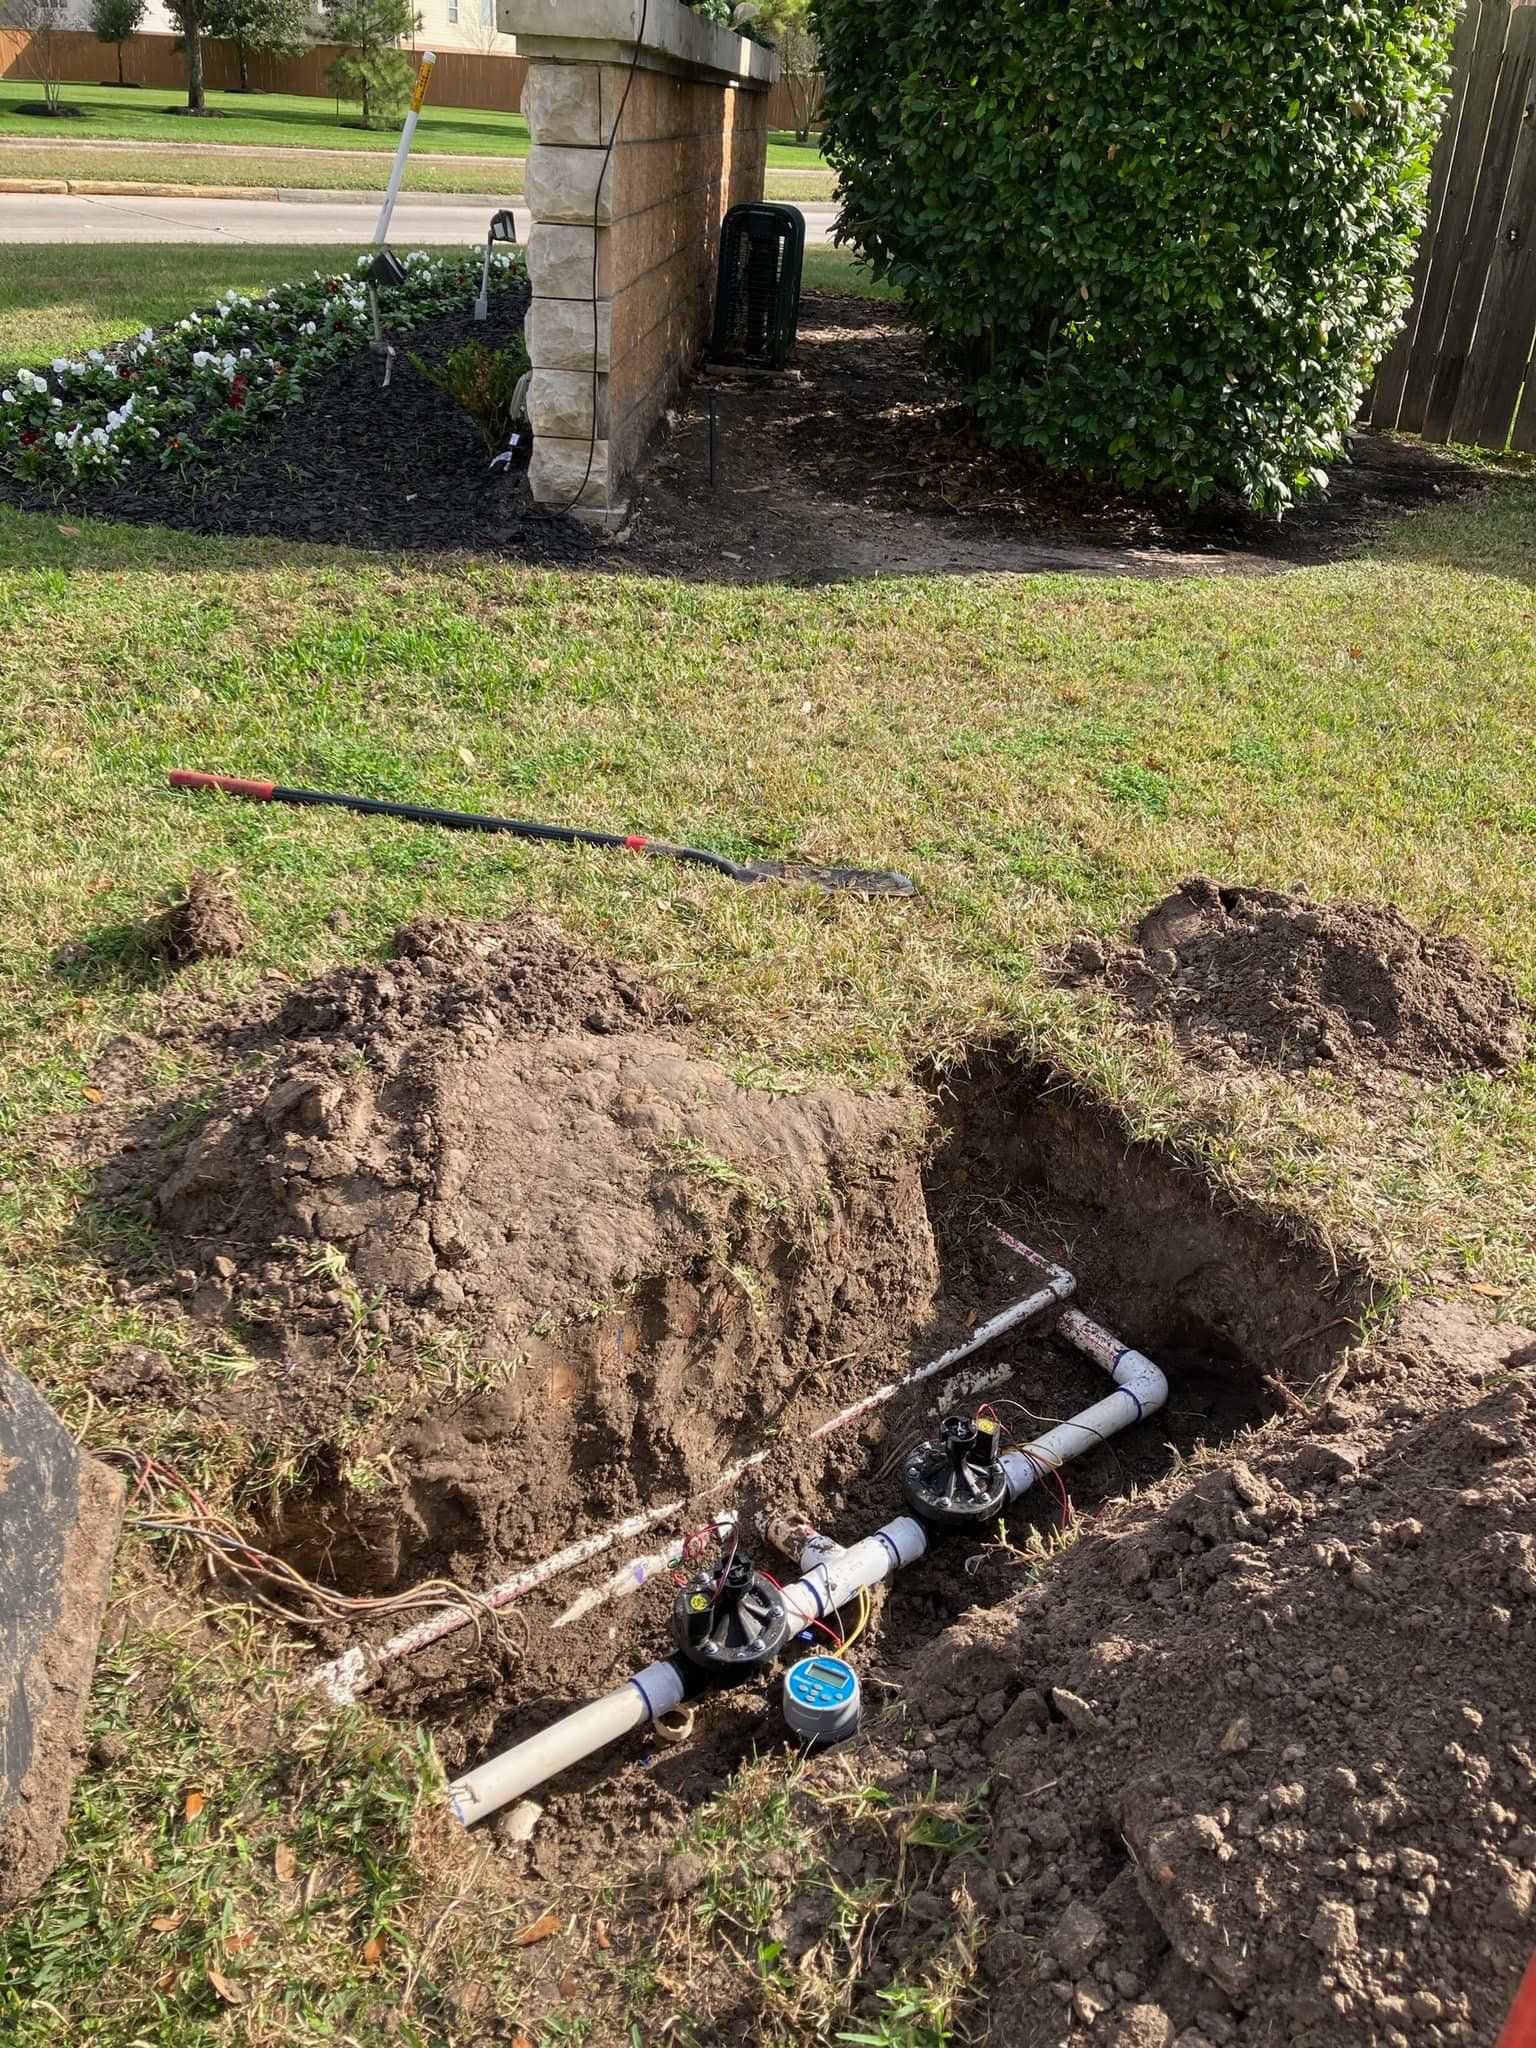 Irrigation Installments for Essex Irrigation Services LLC in New Caney, TX